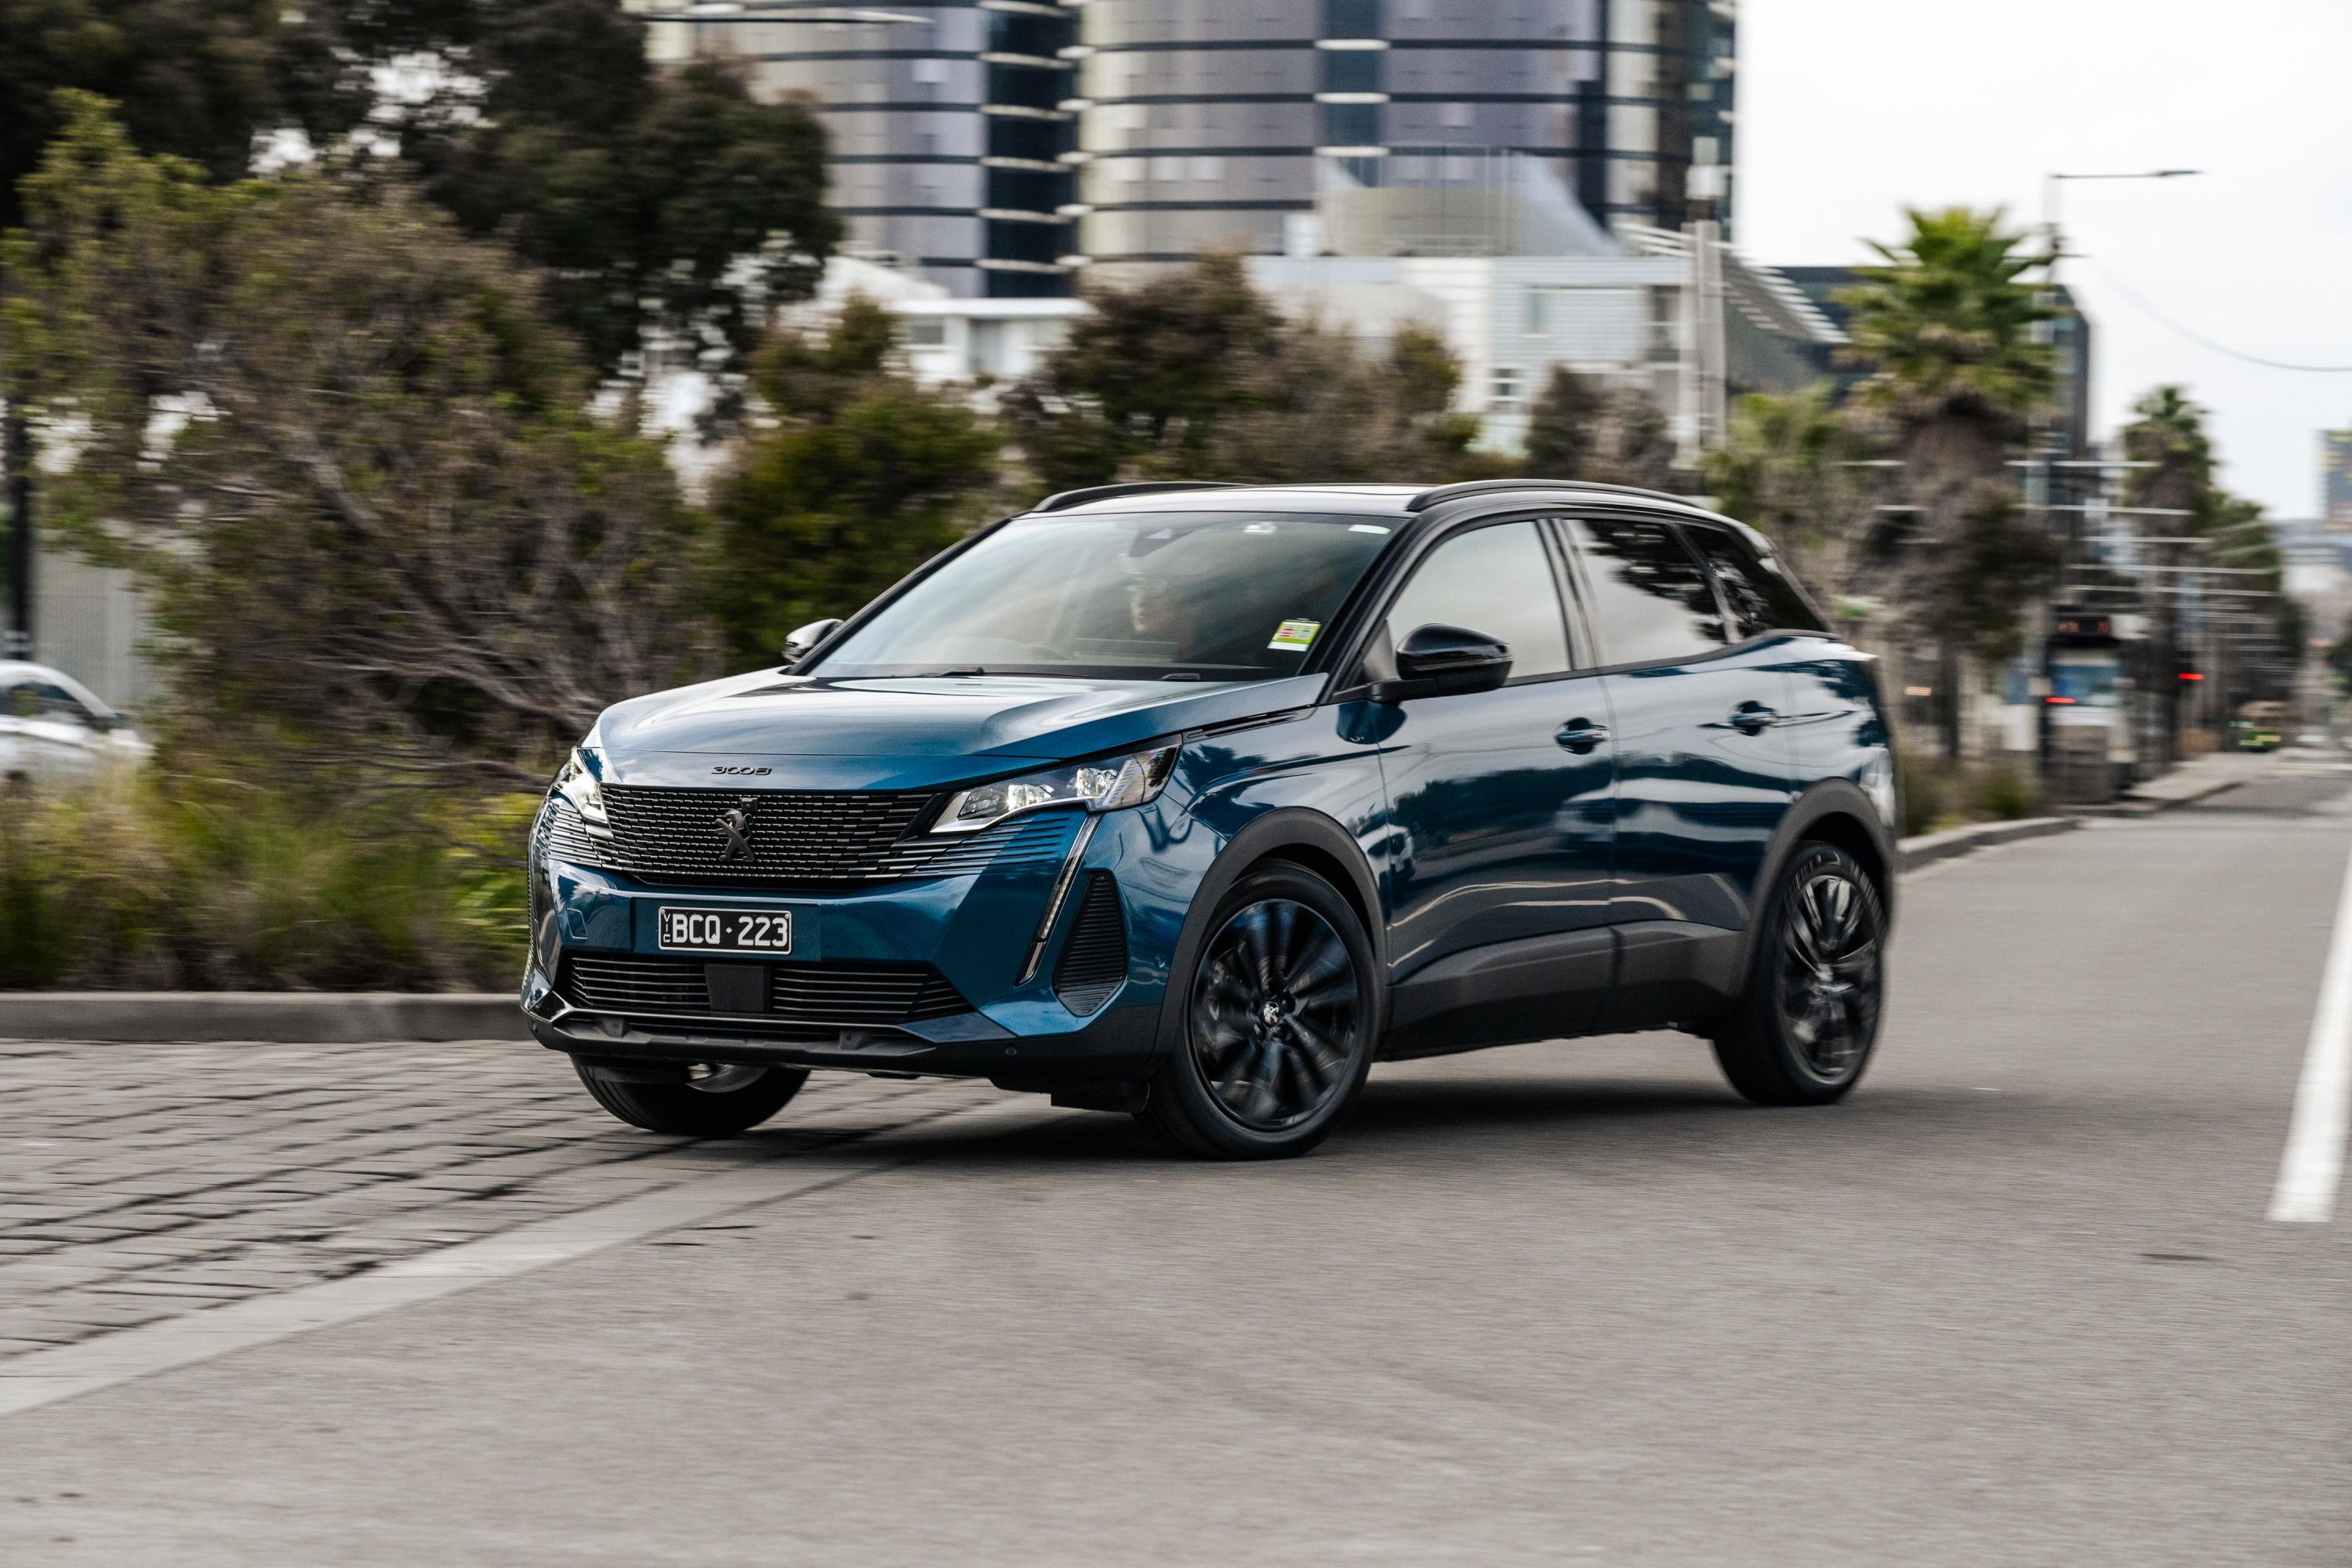 Peugeot 3008: Ultimate Guide to Features, Design, and Safety